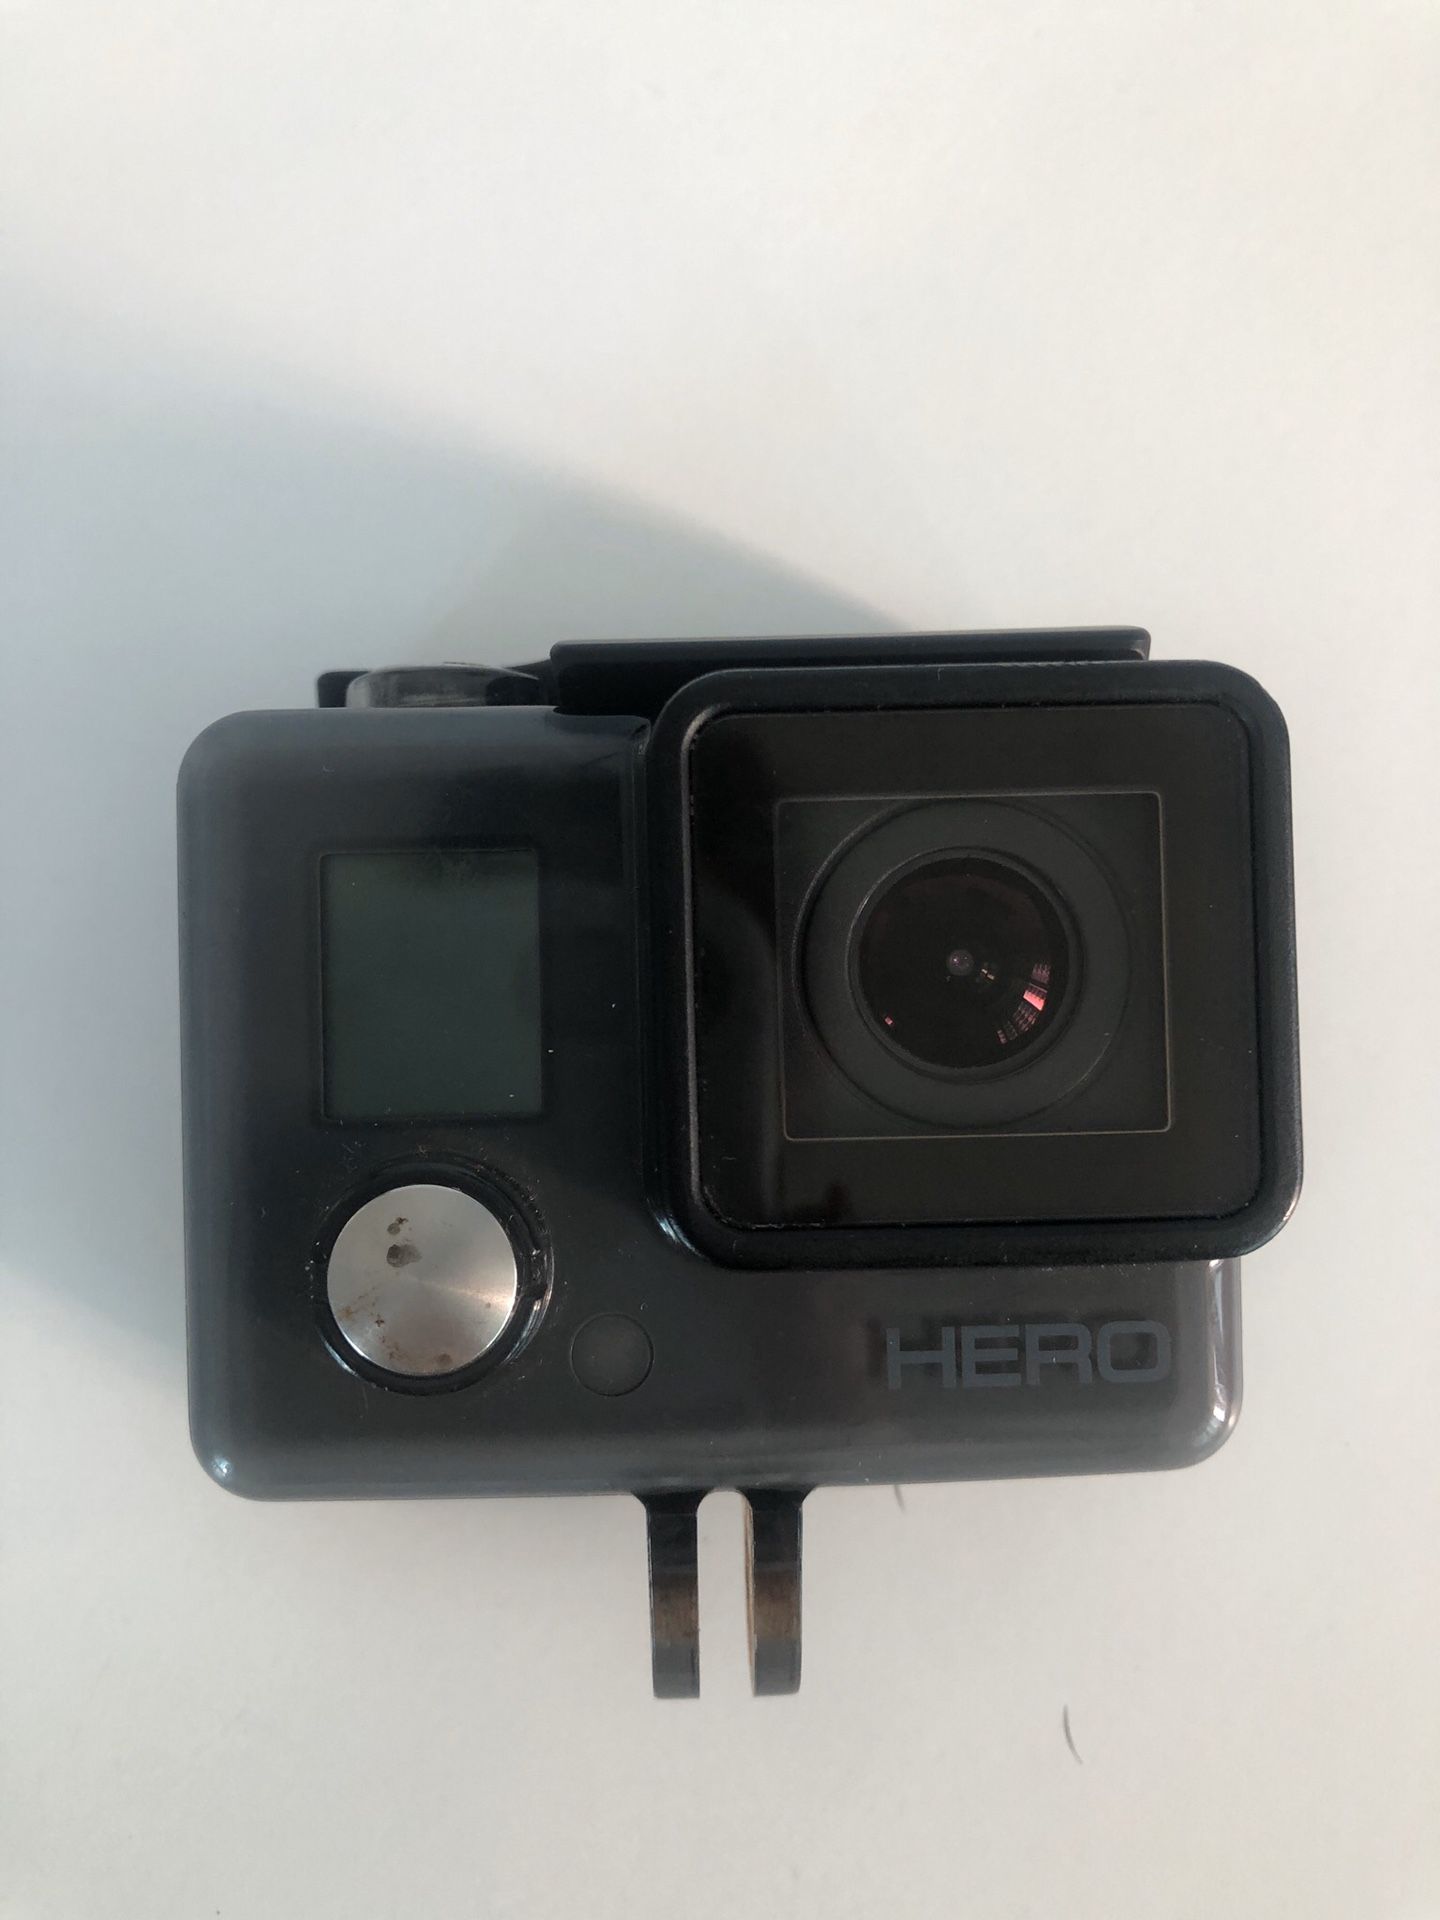 GO PRO HERO 2014. Works perfectly, used probably 5 times. Comes with original box and all the attachments